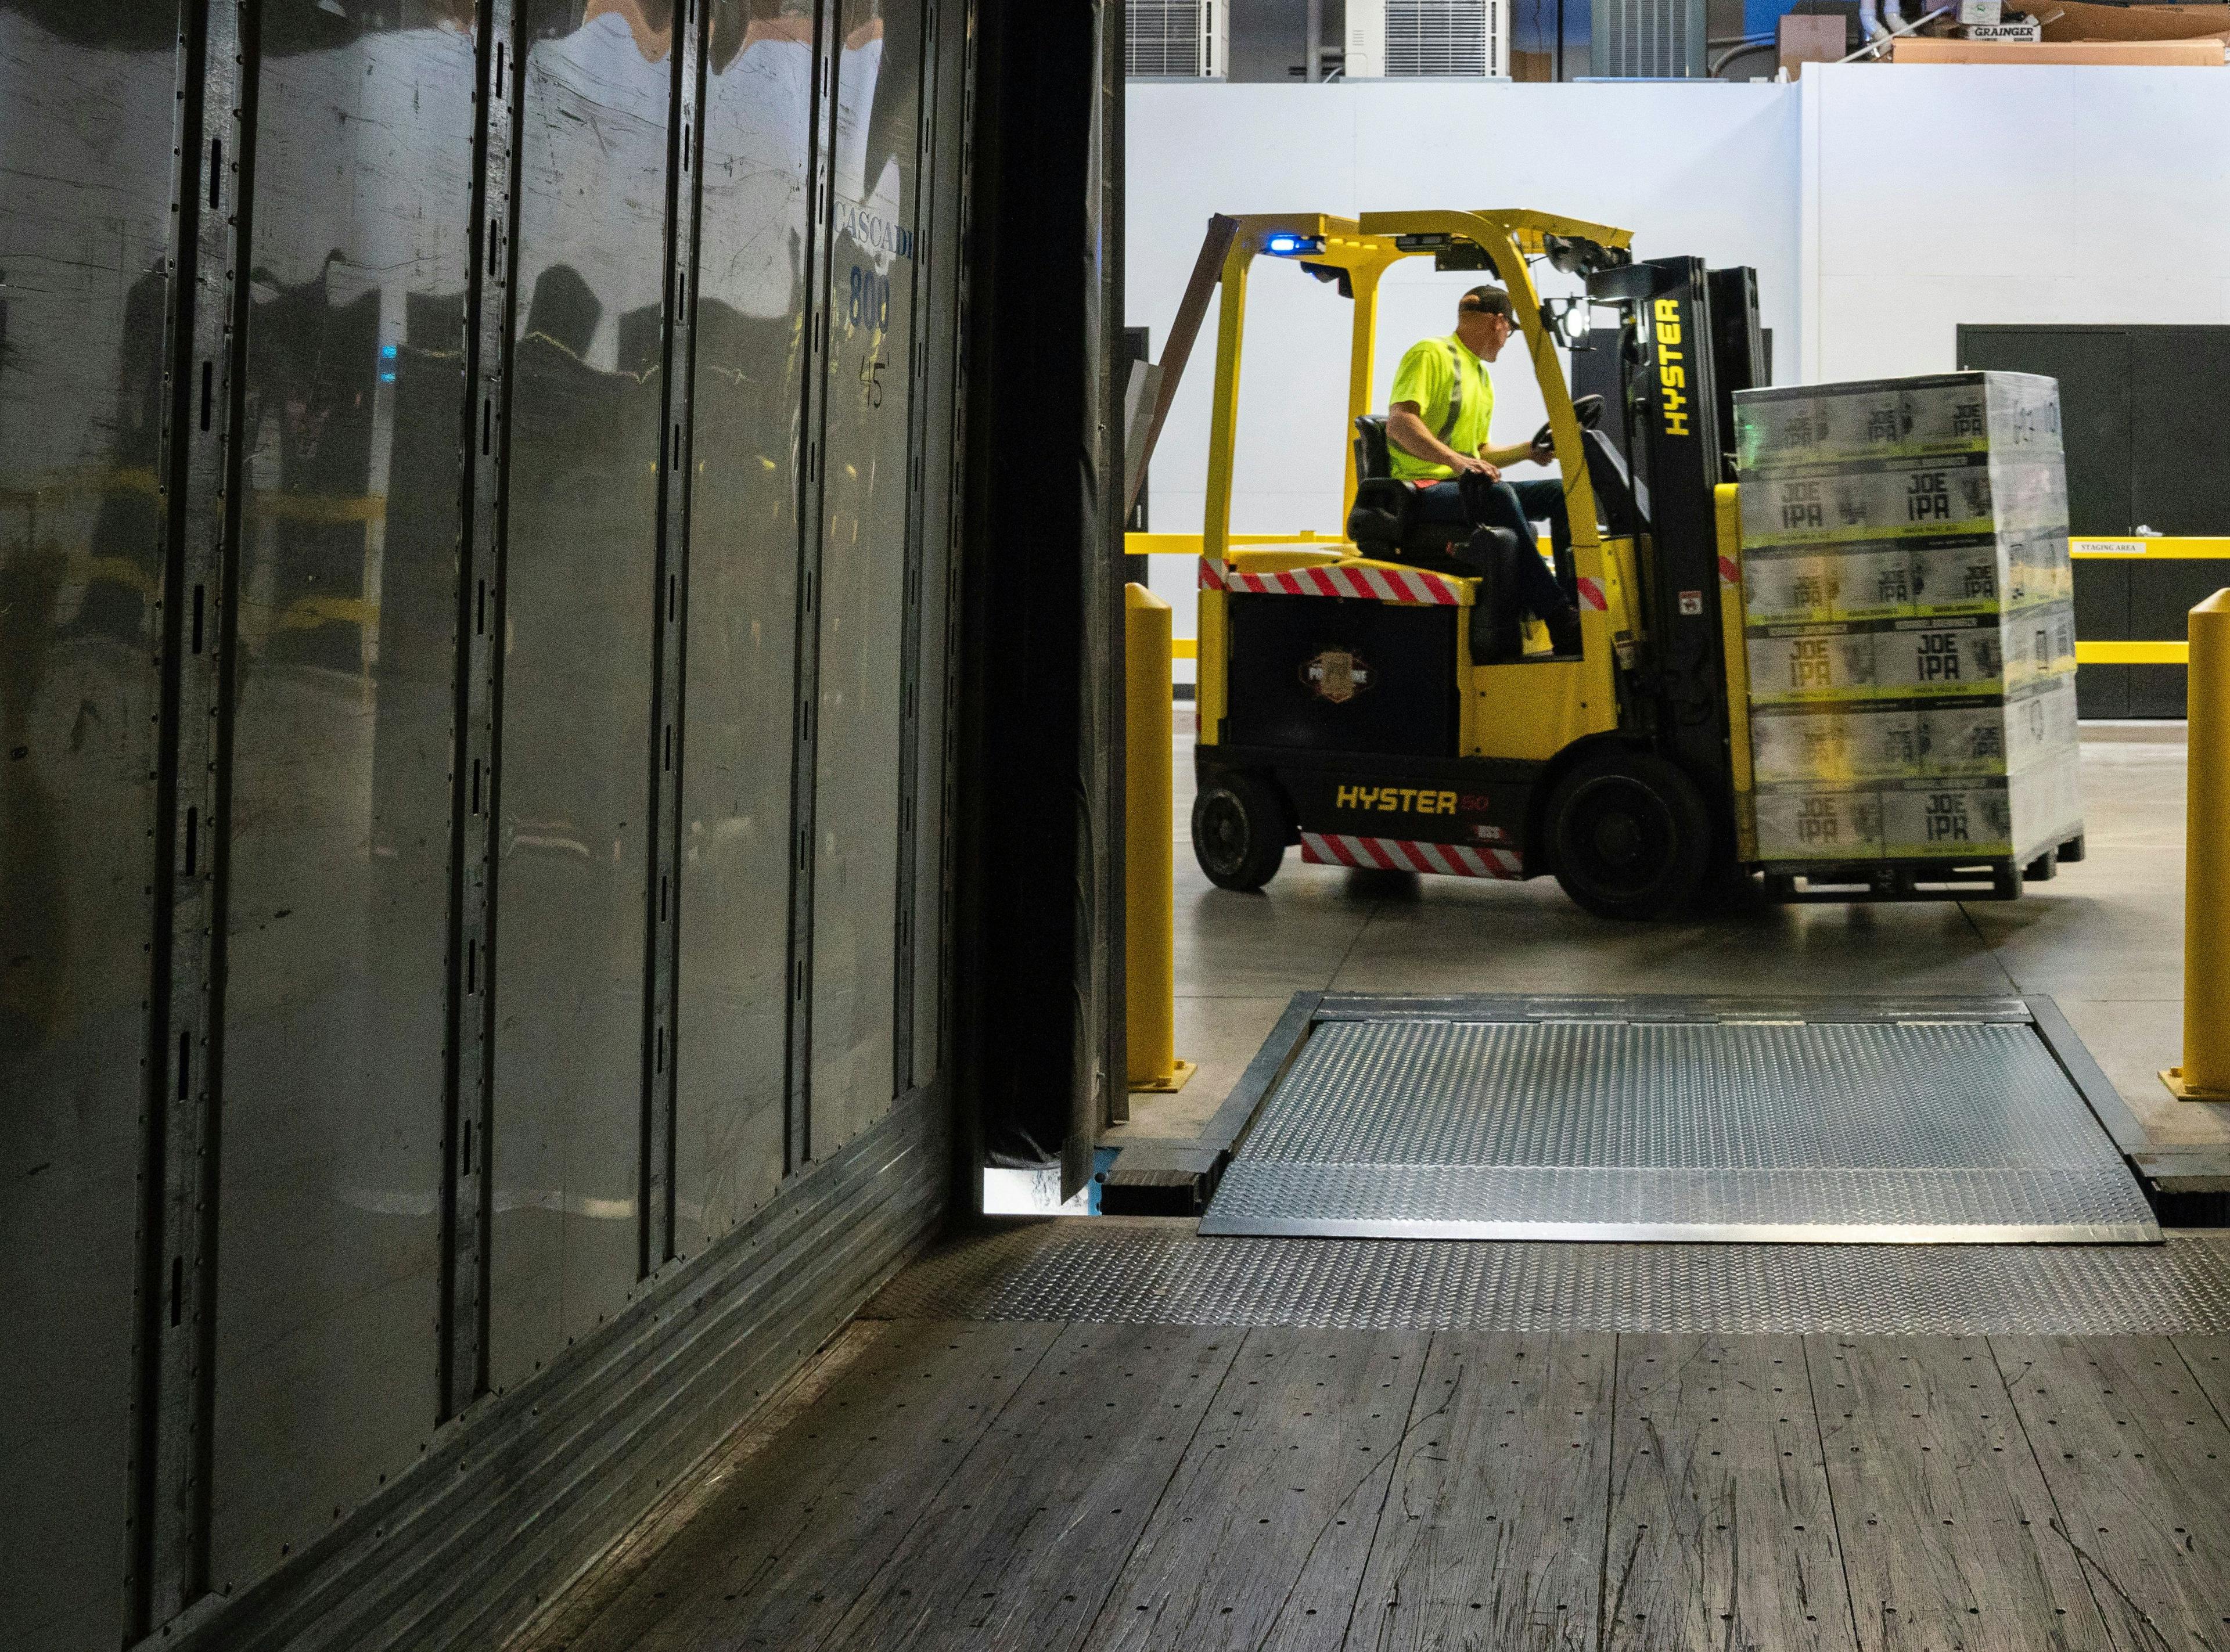 Forklift Expert Witness Permitted to Testify Despite Failure to Inspect the Vehicle in Question